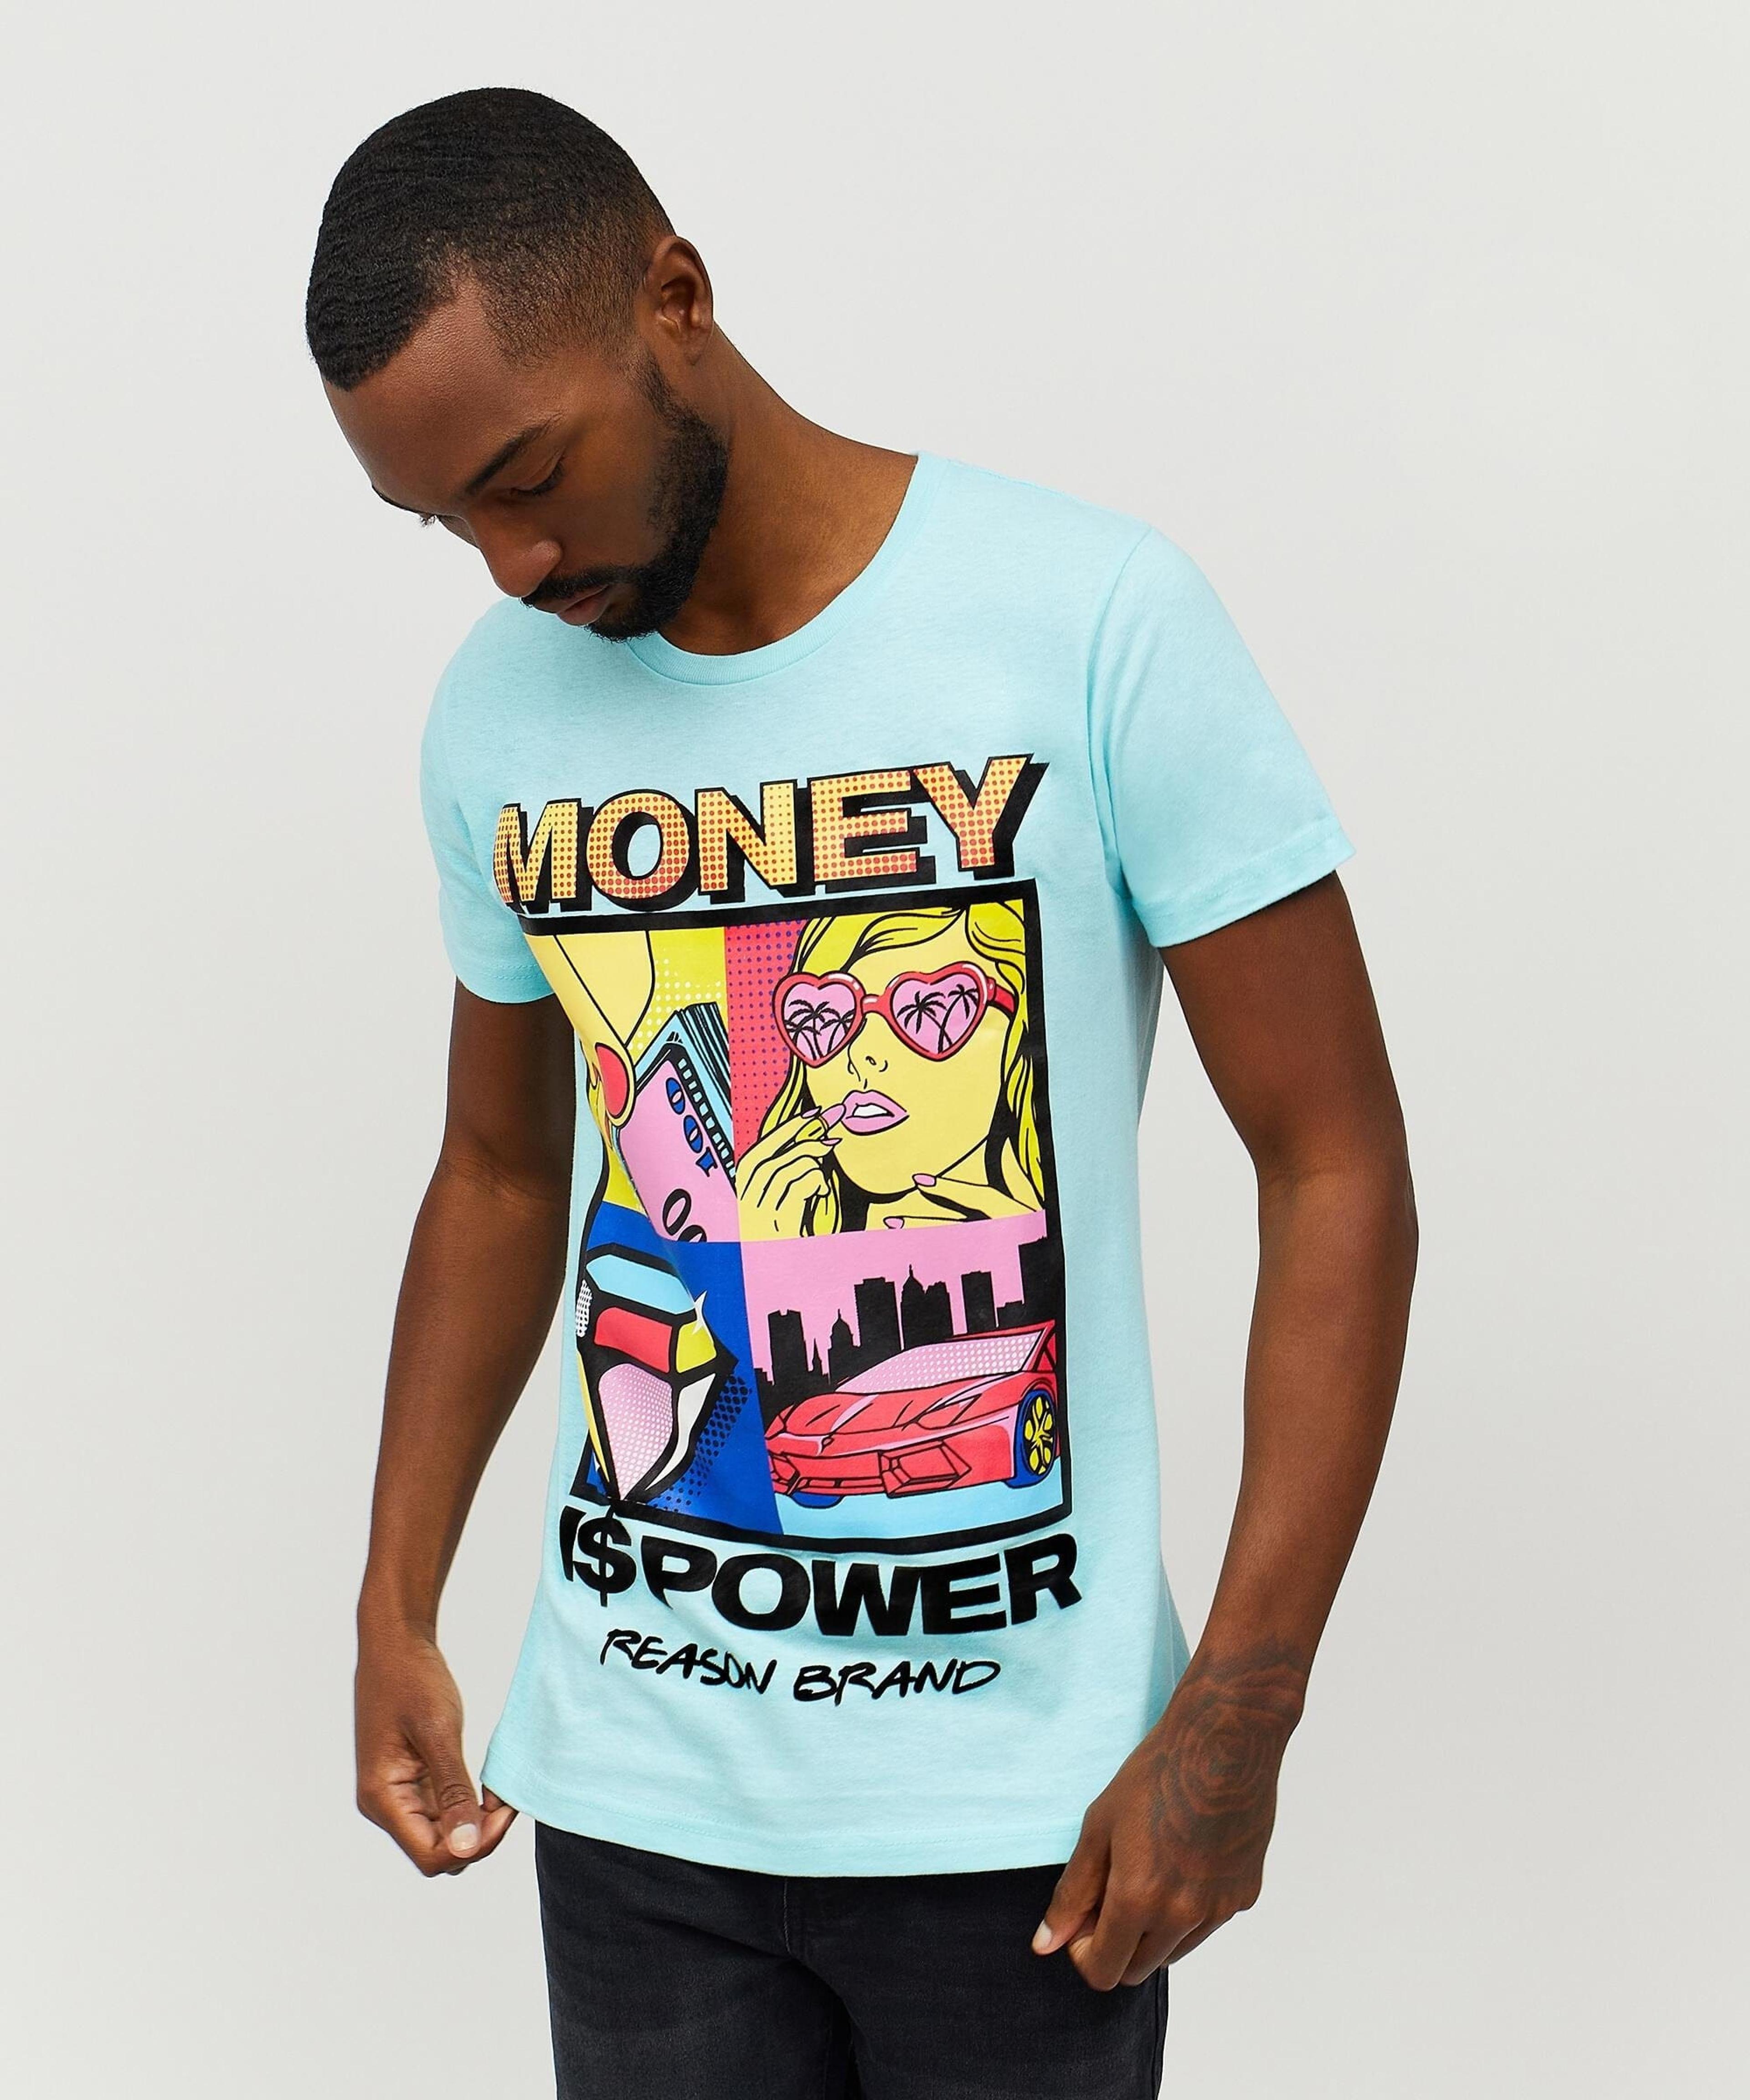 Alternate View 7 of Money Is Power Graphic Tee - Light Blue